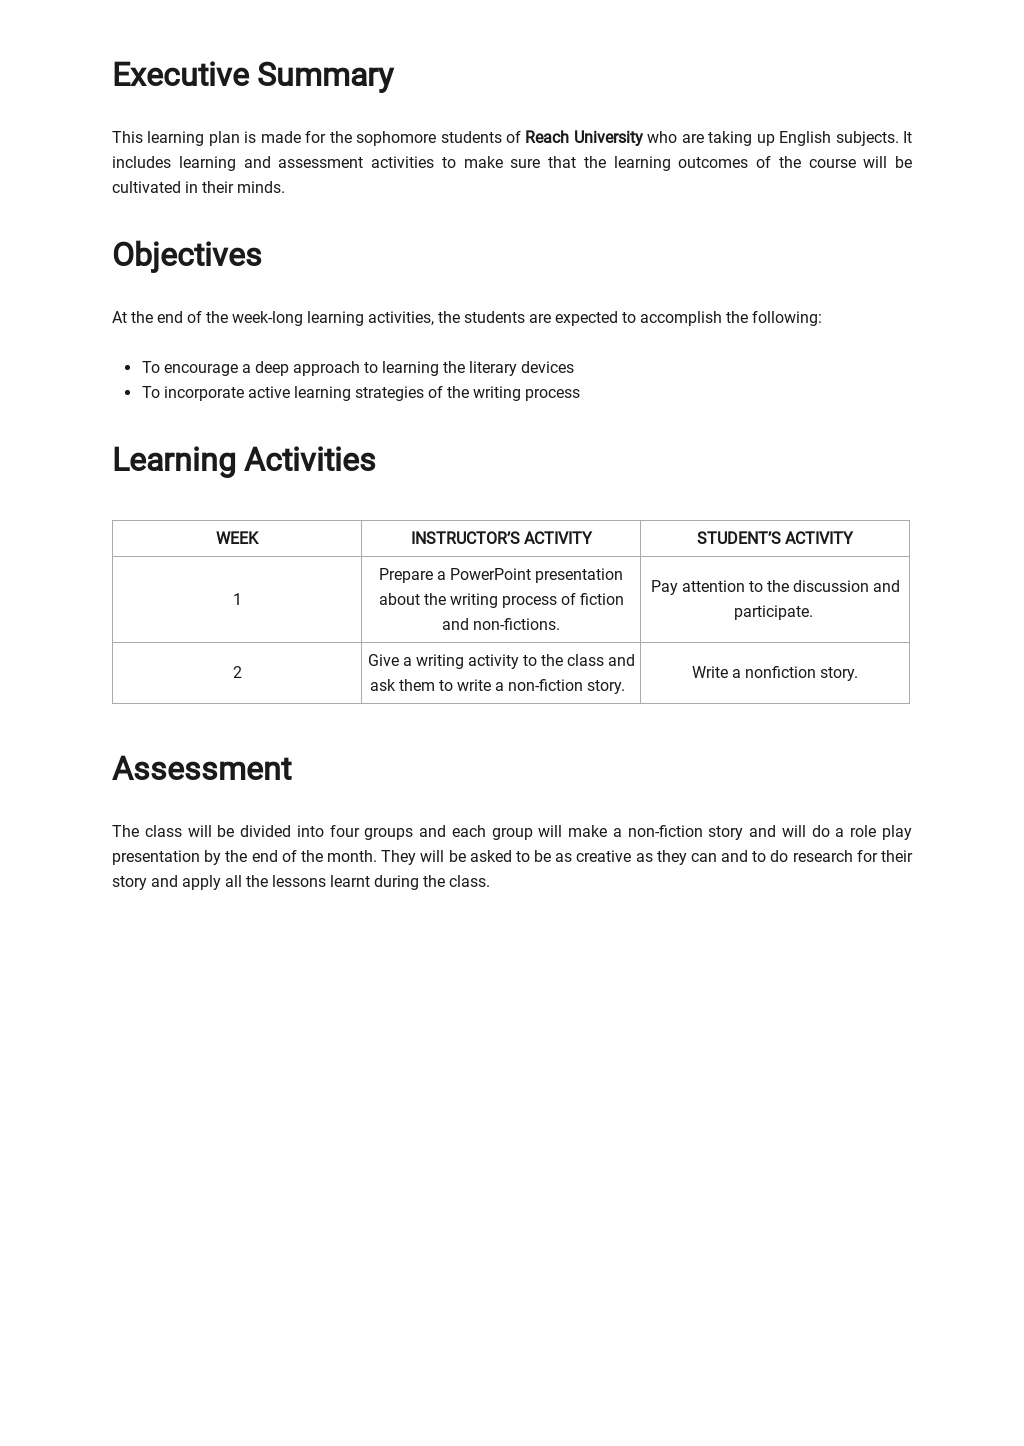 Teaching and Learning Plan Template 1.jpe